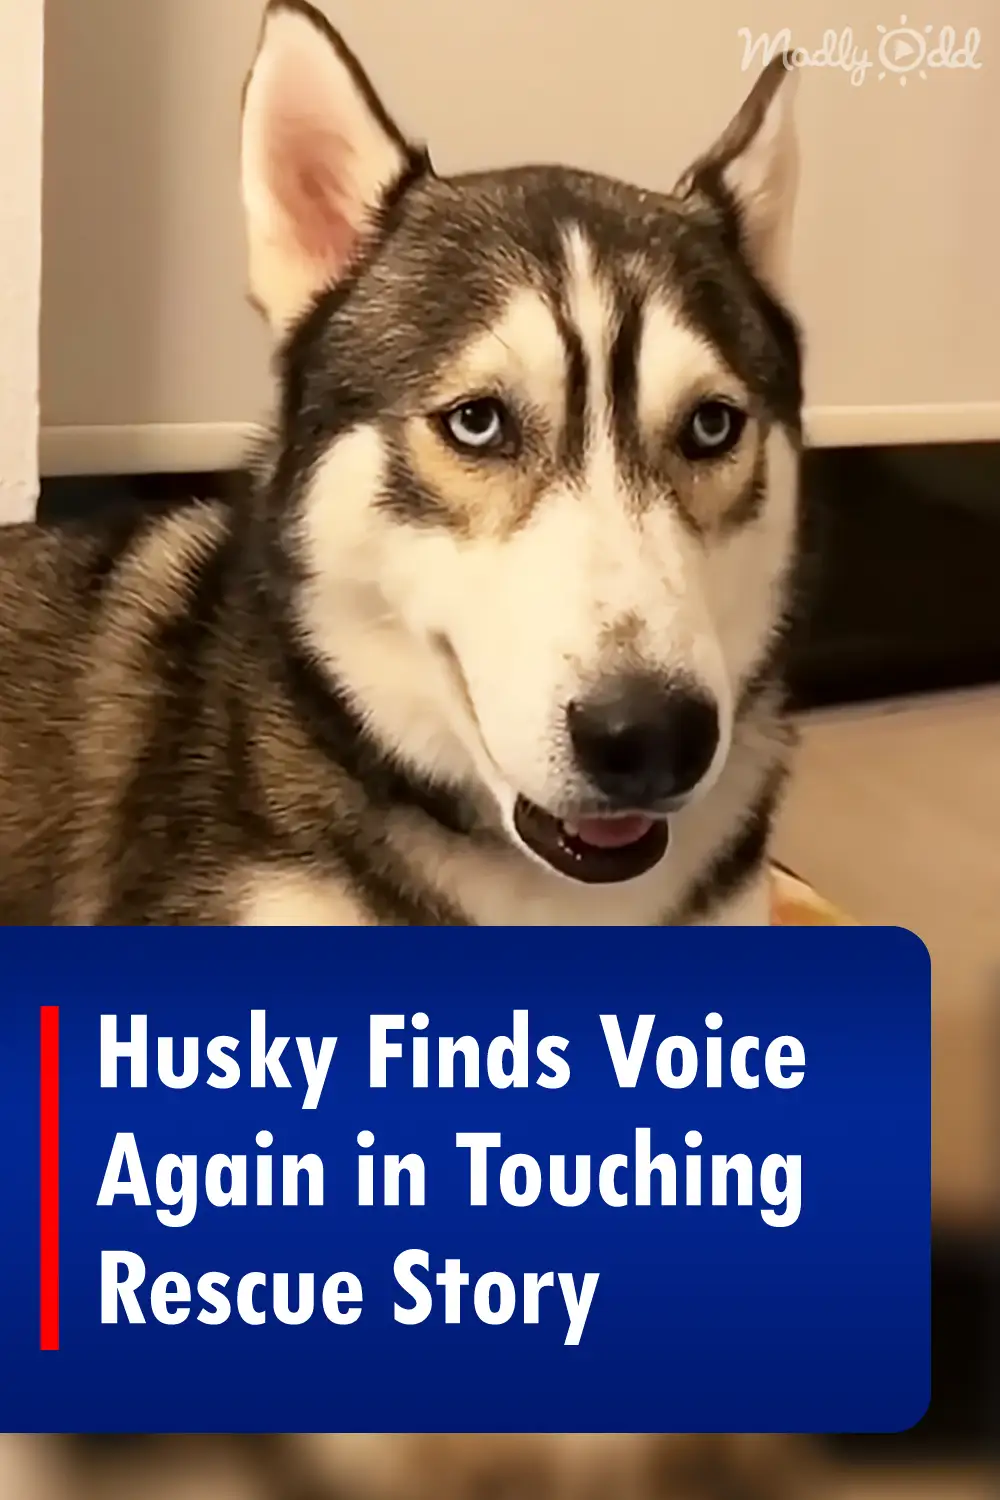 Husky Finds Voice Again in Touching Rescue Story